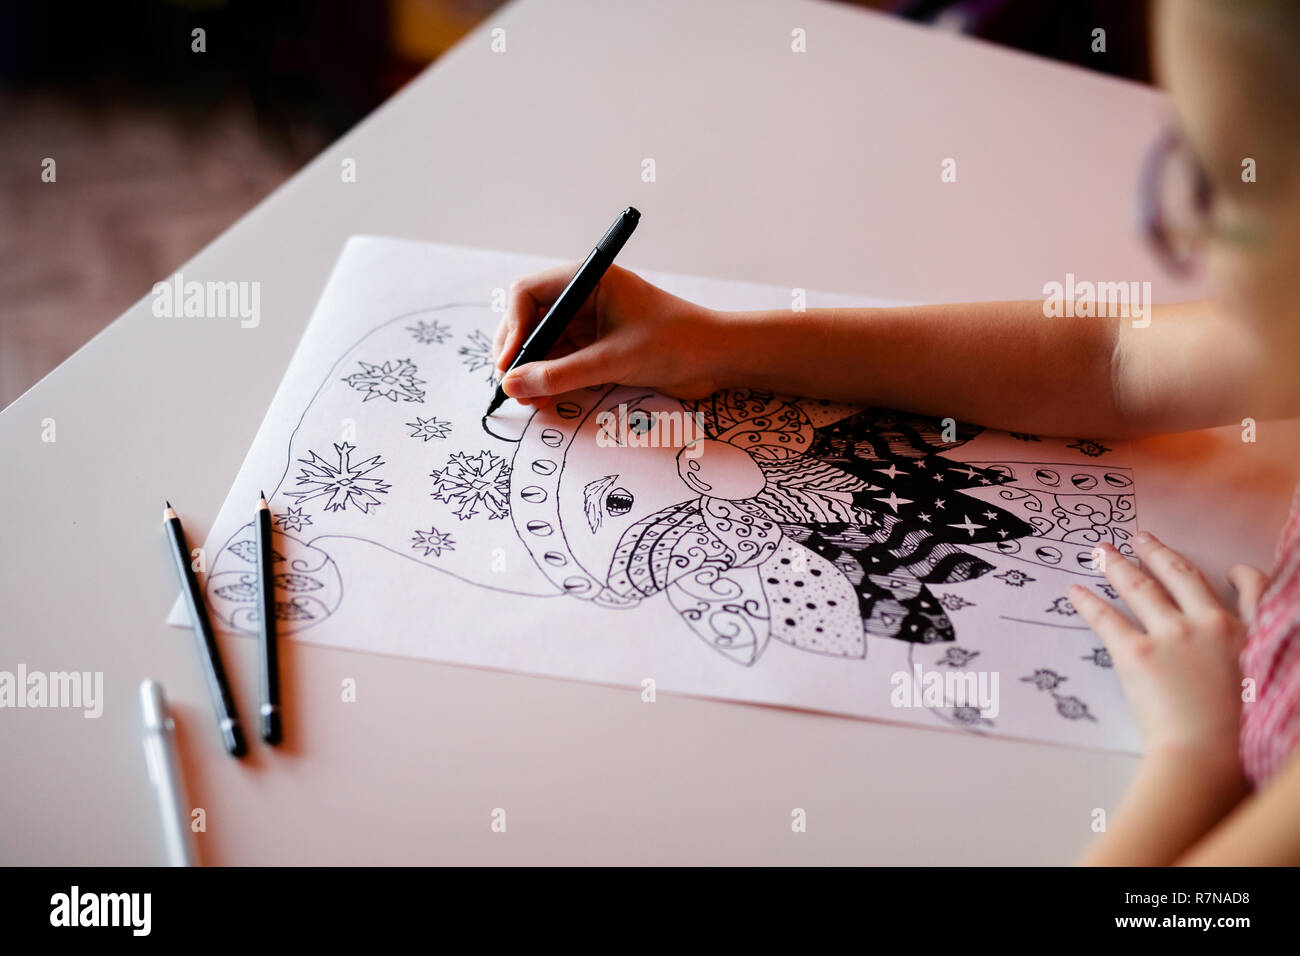 Pencil drawing new idea bulb on white paper Stock Photo - Alamy